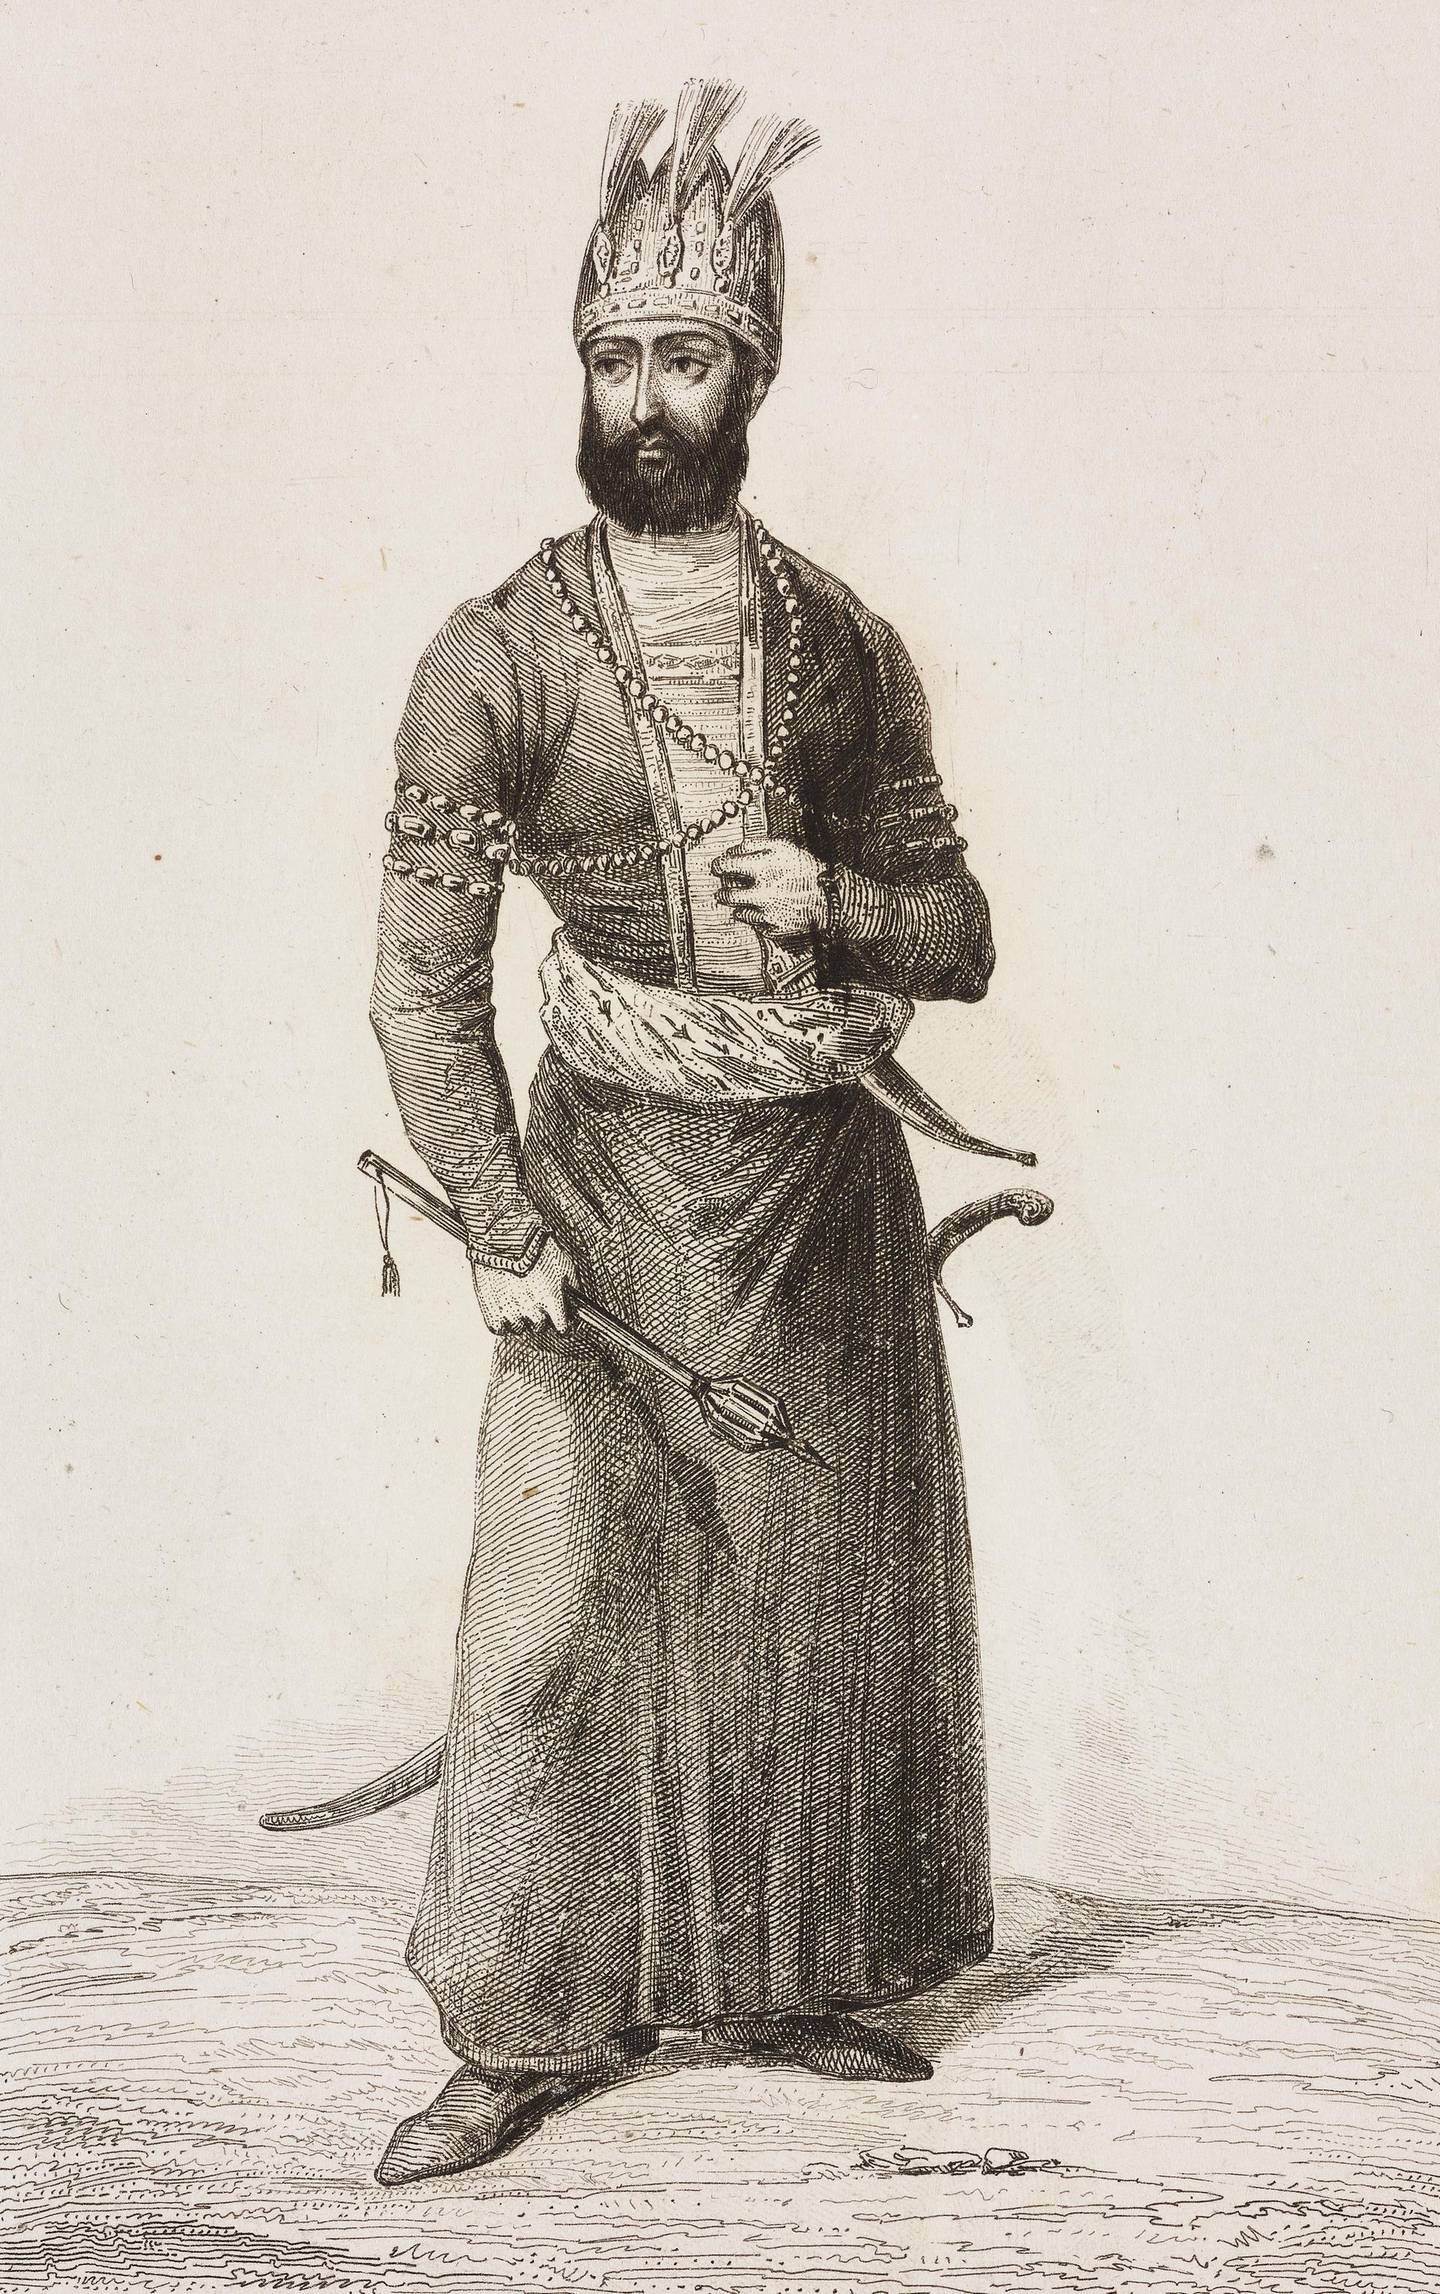 Nader Shah (1688-1747), Shah of Persia, engraving by Chaillot after Vernier from La Perse by Louis Dubeux (1798-1863), LUnivers pittoresque, published by Firmin Didot Freres, Paris, 1841. Getty Images